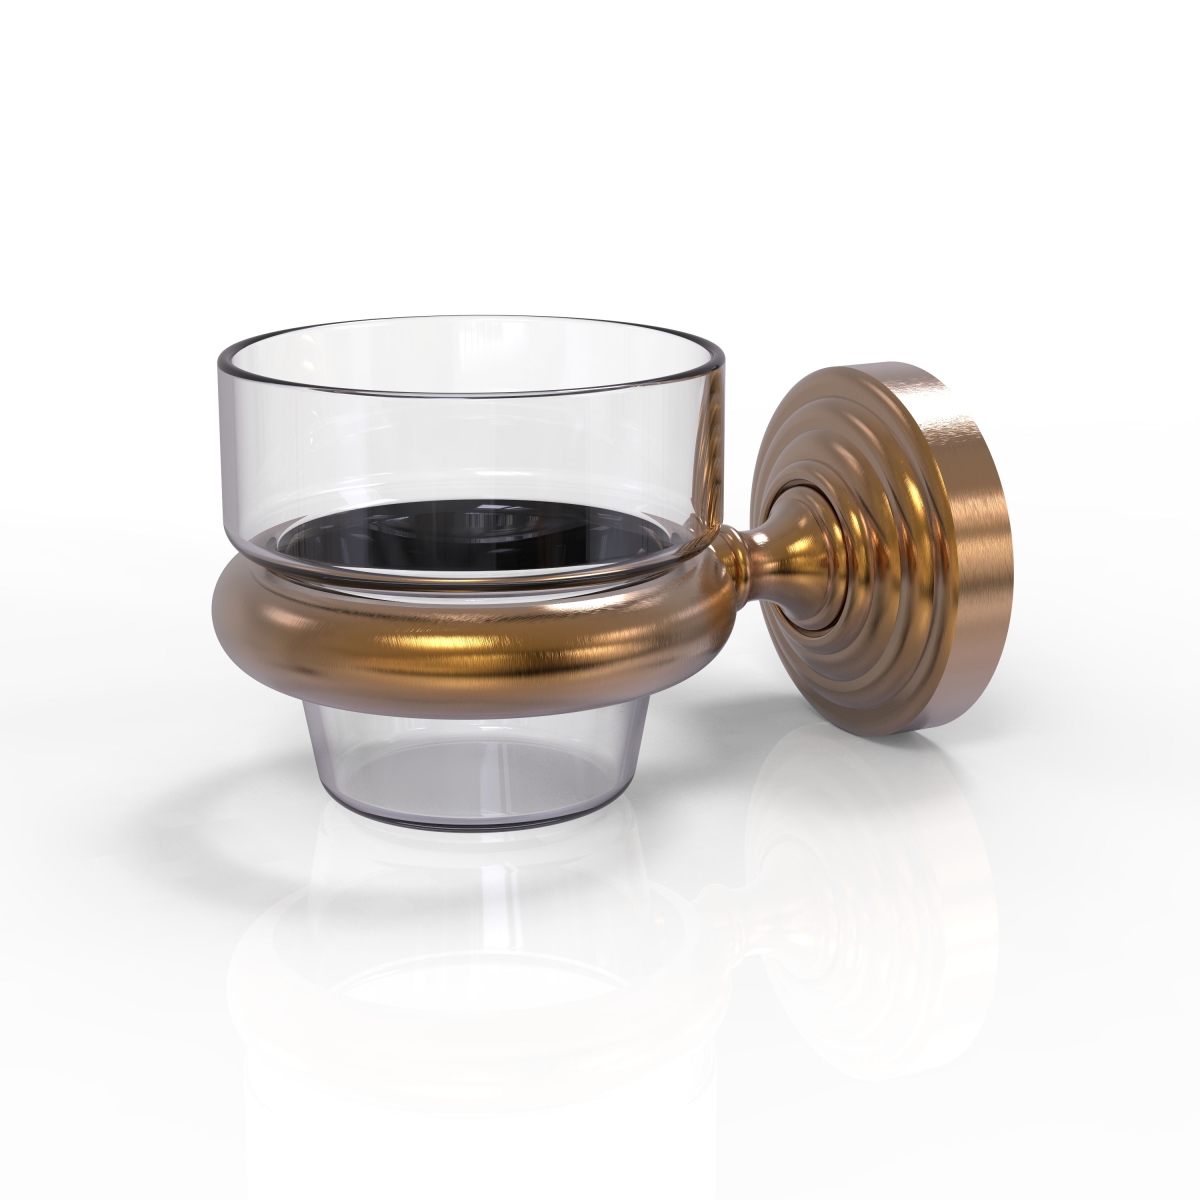 Wp-64-bbr Waverly Place Collection Wall Mounted Votive Candle Holder, Brushed Bronze